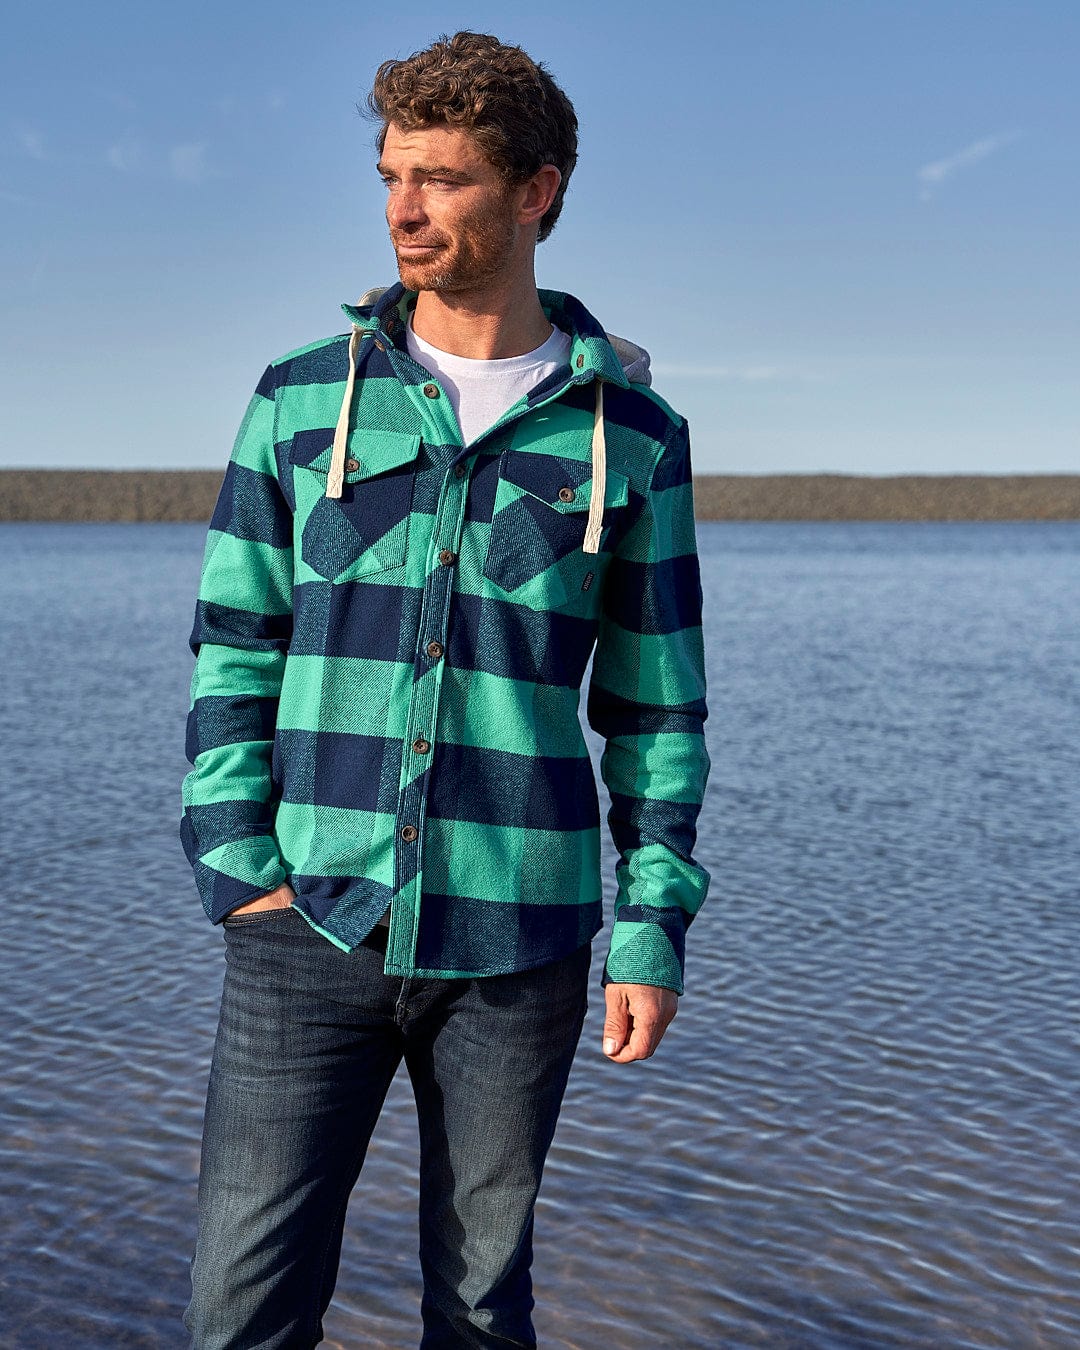 A man wearing a Saltrock Beale - Mens Heavy Weight Hooded Shirt - Dark Green standing by the water.